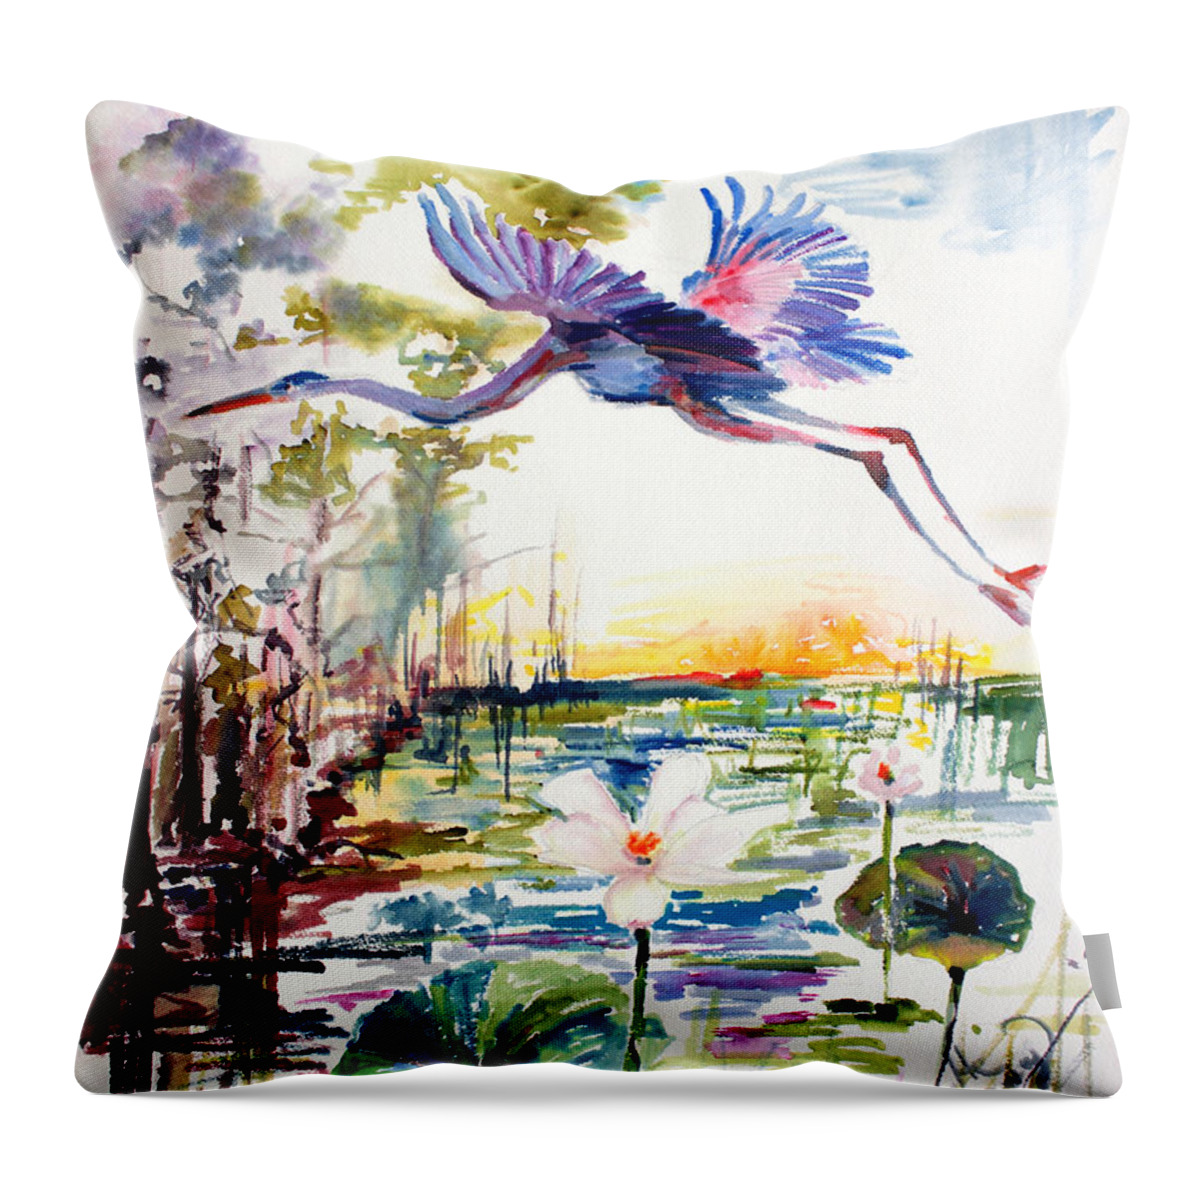 Blue Heron Throw Pillow featuring the painting Blue Heron Glides over Lotus Flowers by Ginette Callaway